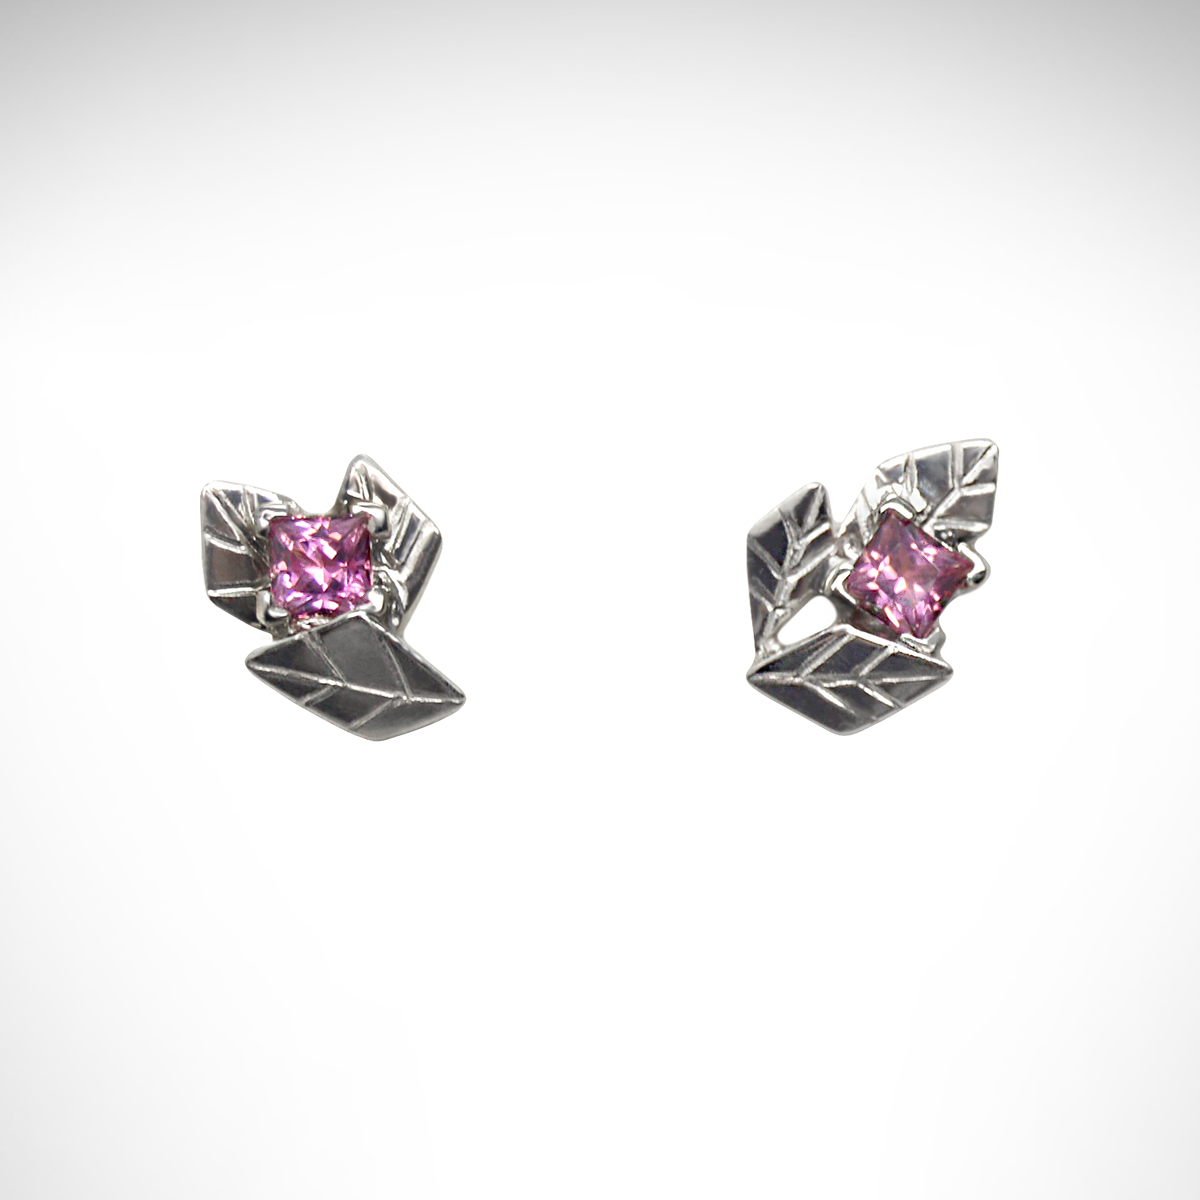 14k white gold stud earrings, carved in the shape of clusters of leaves, set with square-cut pink tourmaline gemstones.